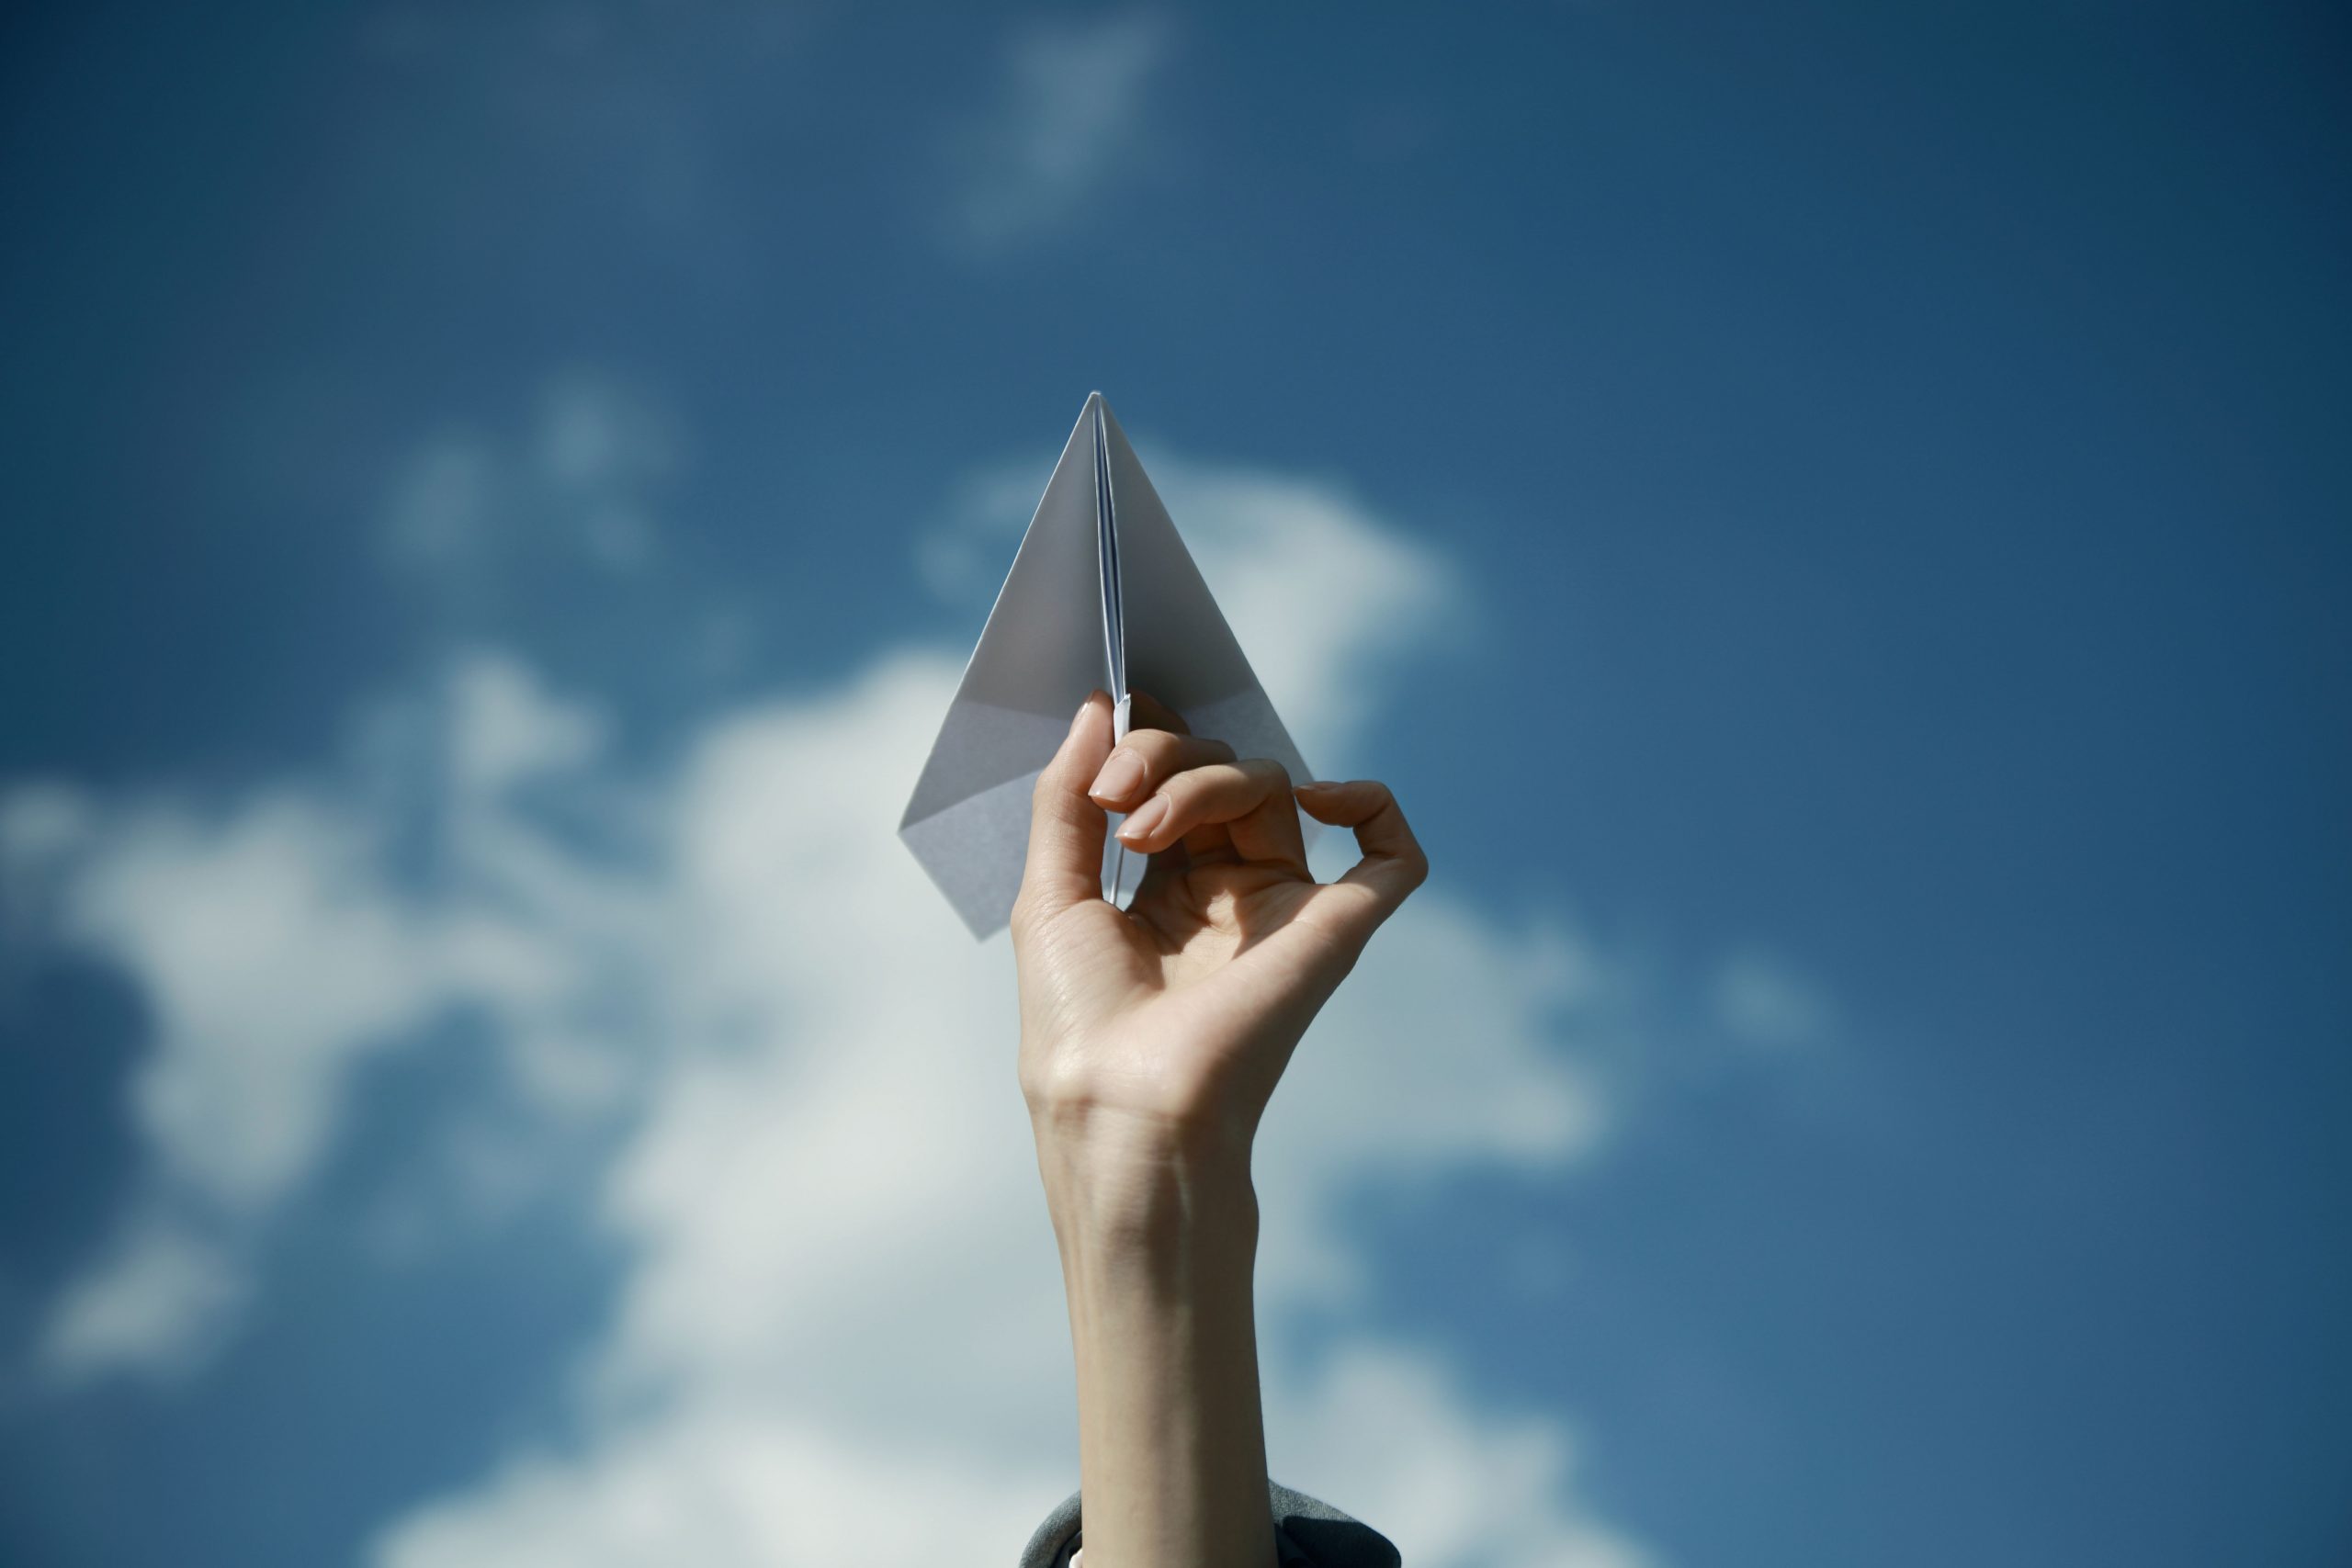 Hand holding a paper airplane with blue skies and clouds in the background